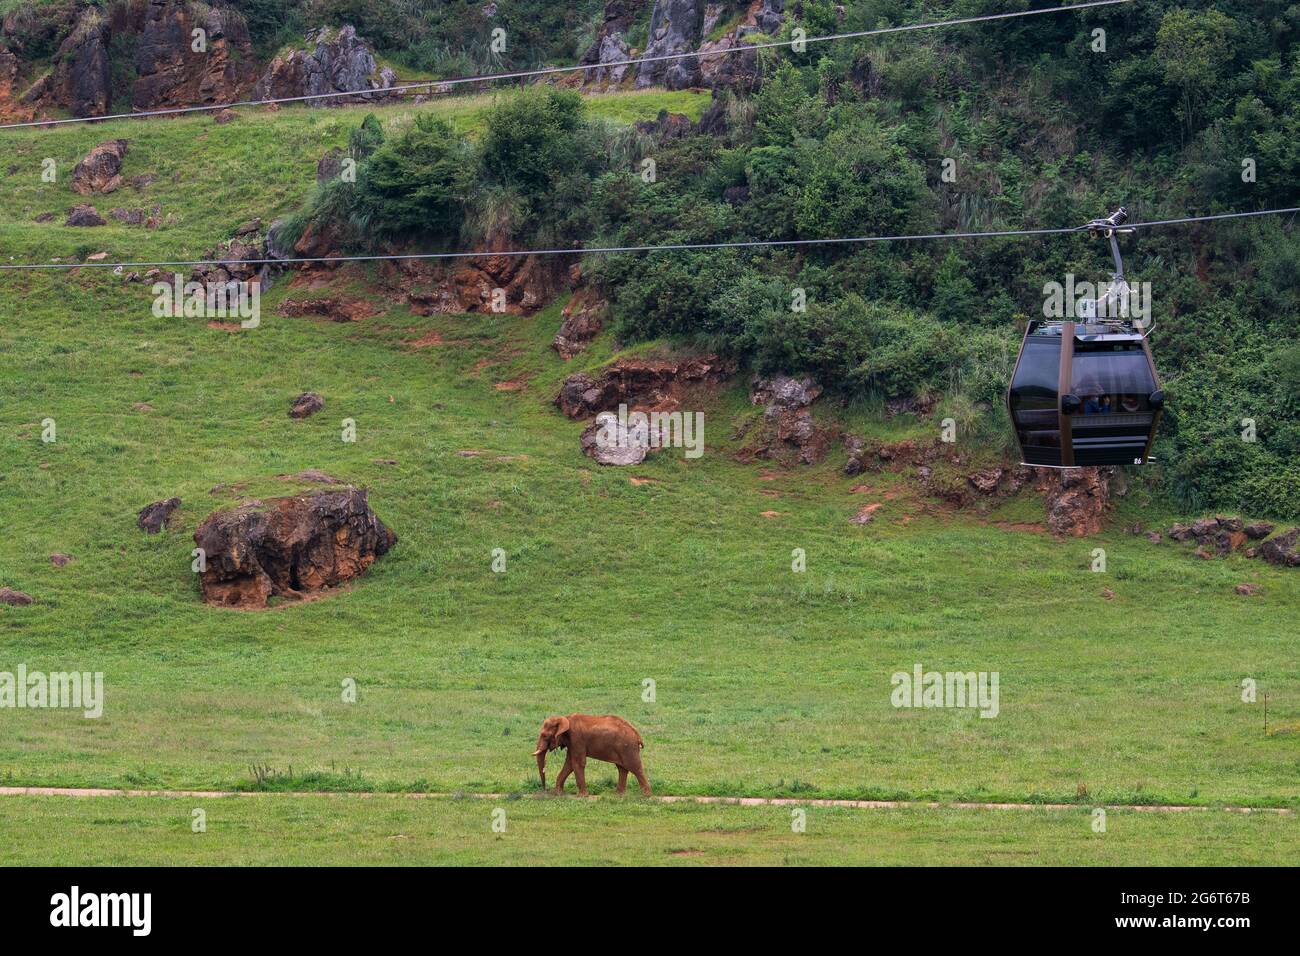 A cable car passing over an African Elephant in Cabarceno Nature Park. The Cabarceno Nature Park is not a conventional zoo. It is an area of 750 hecta Stock Photo